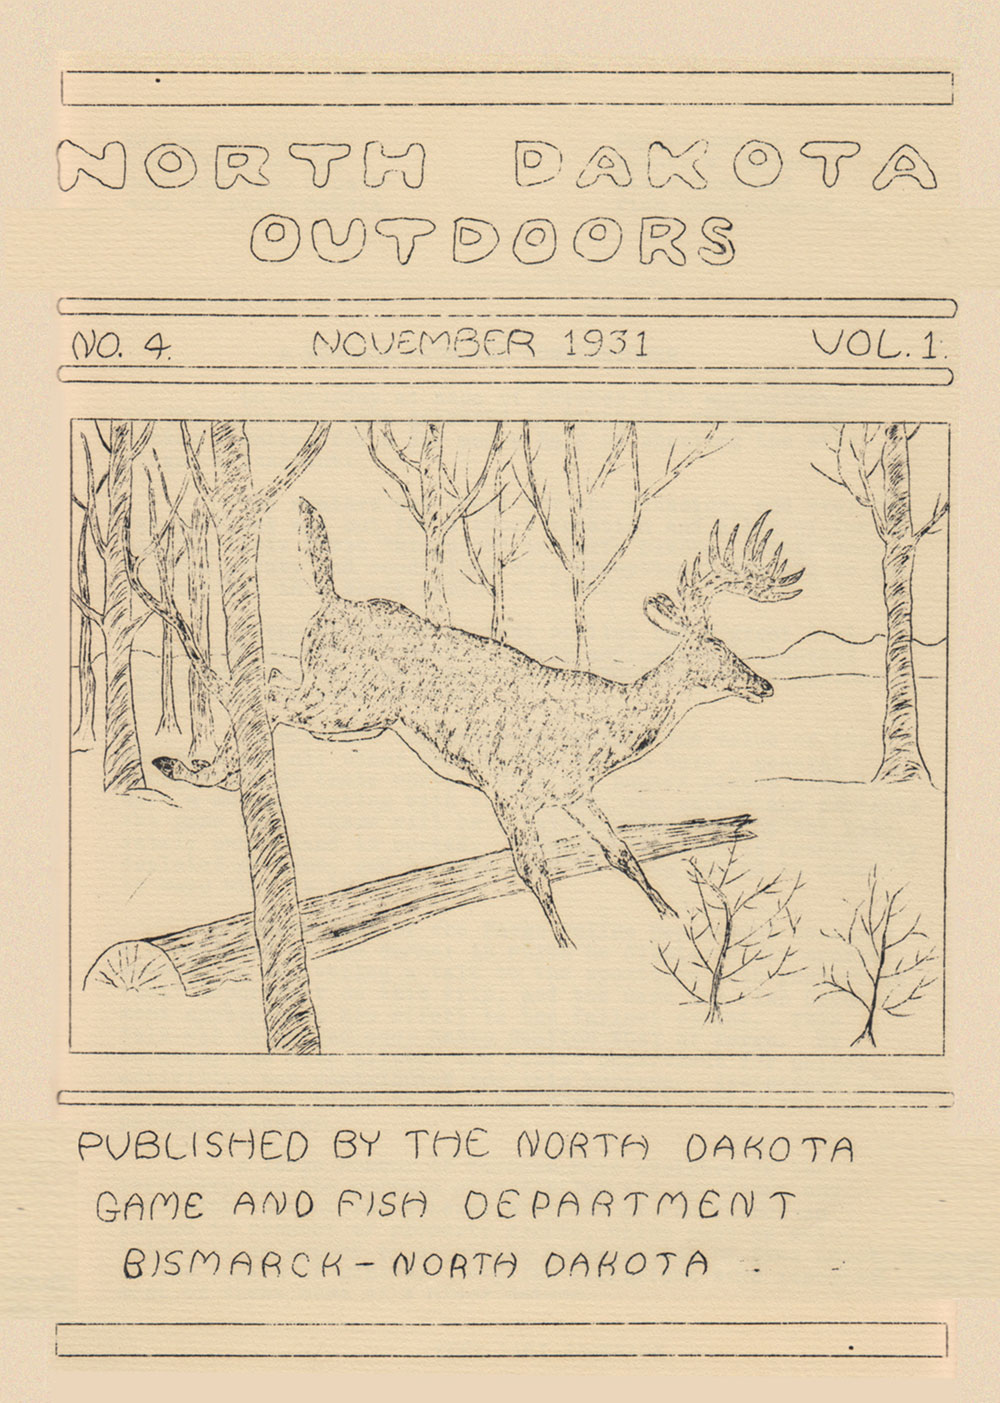 Cover of North Dakota Outdoors for the month of November 1931